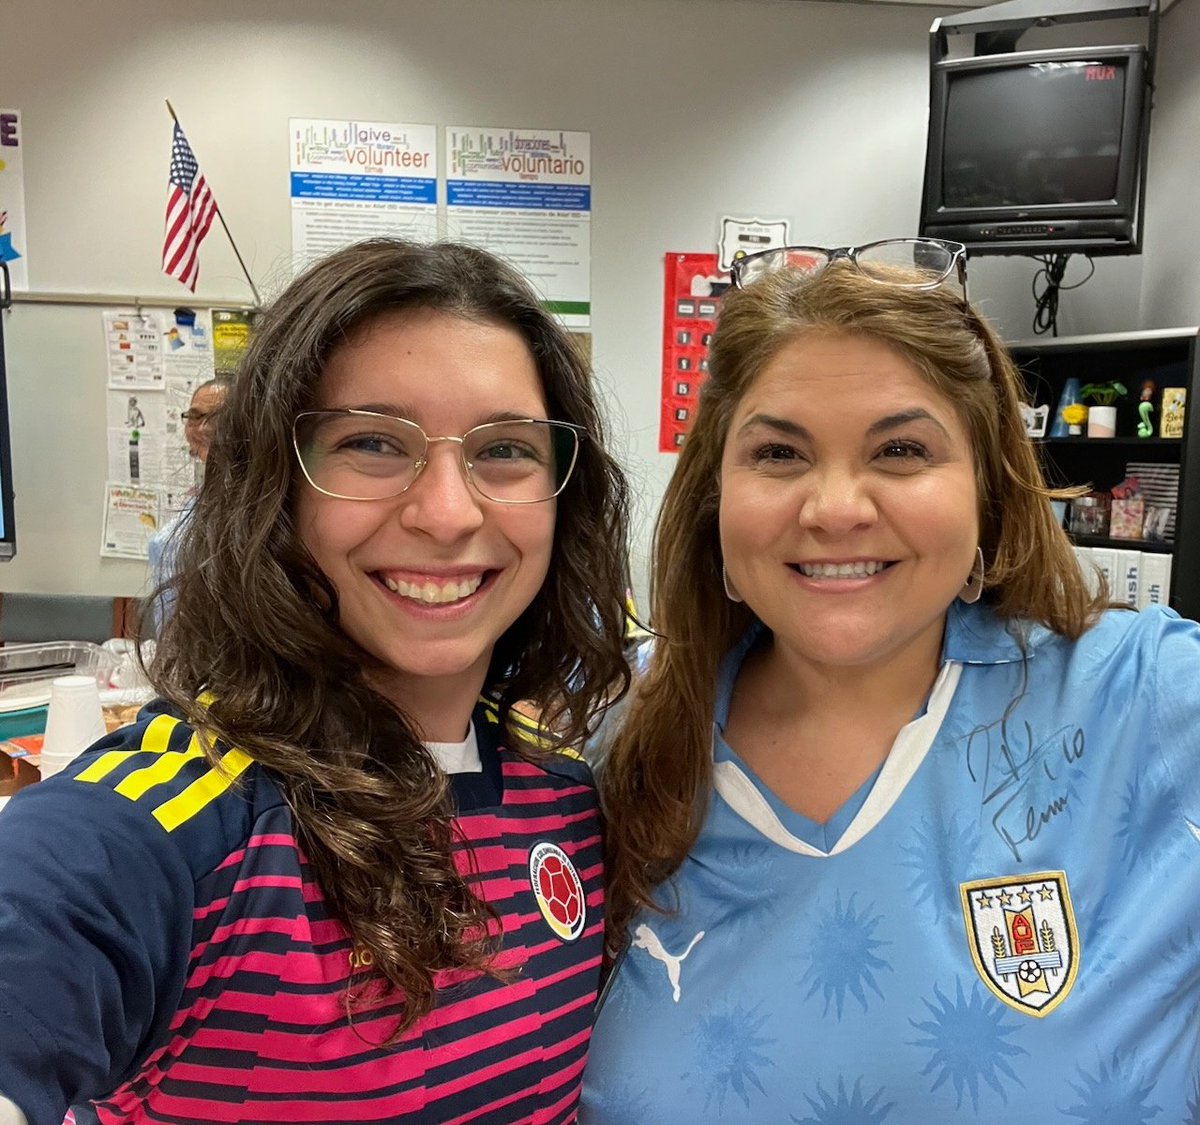 One of my favorite things about @AliefISD is the diversity!! Ending our #HispanicHeritageMonth celebration sporting our 'selección' ⚽️ jerseys!!  🇺🇾 🇨🇴 🇲🇽 🇦🇷🇸🇻